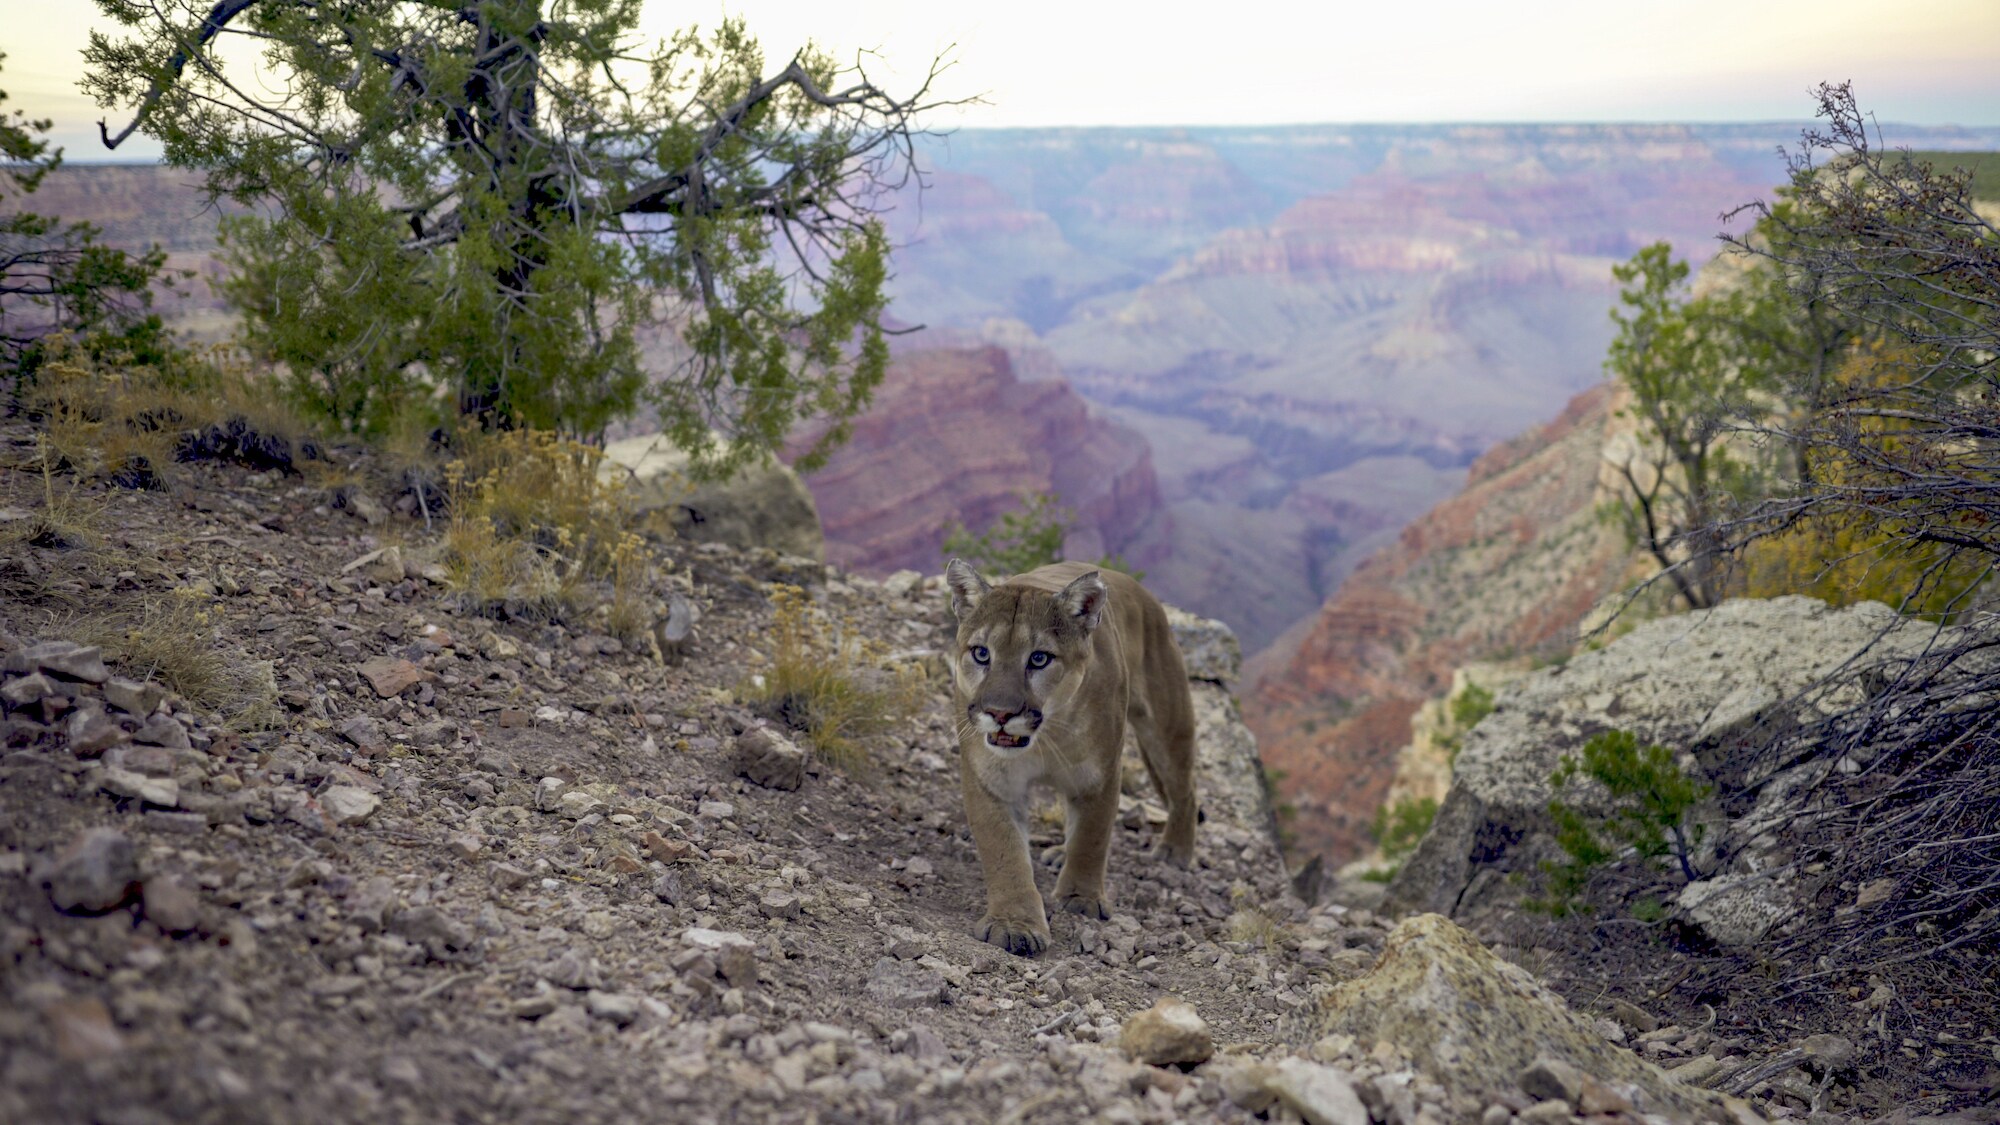 Never filmed before, a mountain lion navigates the rim of the Grand Canyon, AZ. (National Geographic for Disney+)